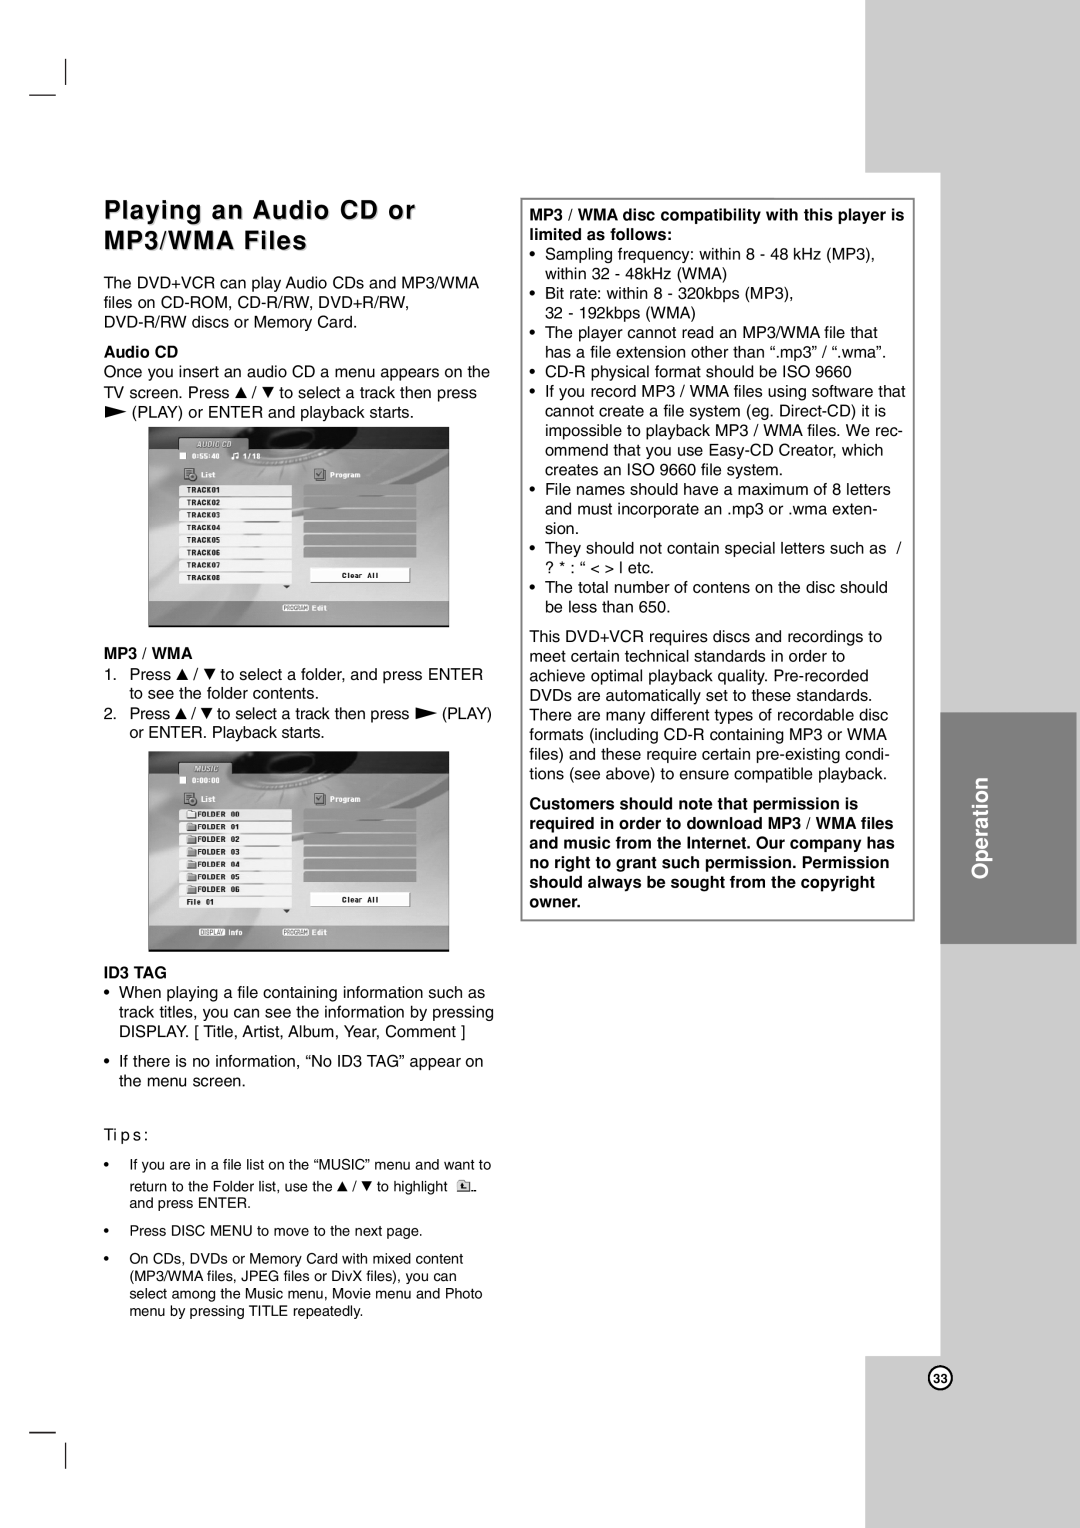 LG Electronics LDX-514 owner manual Playing an Audio CD or MP3/WMA Files, Operation, MP3 / WMA, ID3 TAG, Tips 